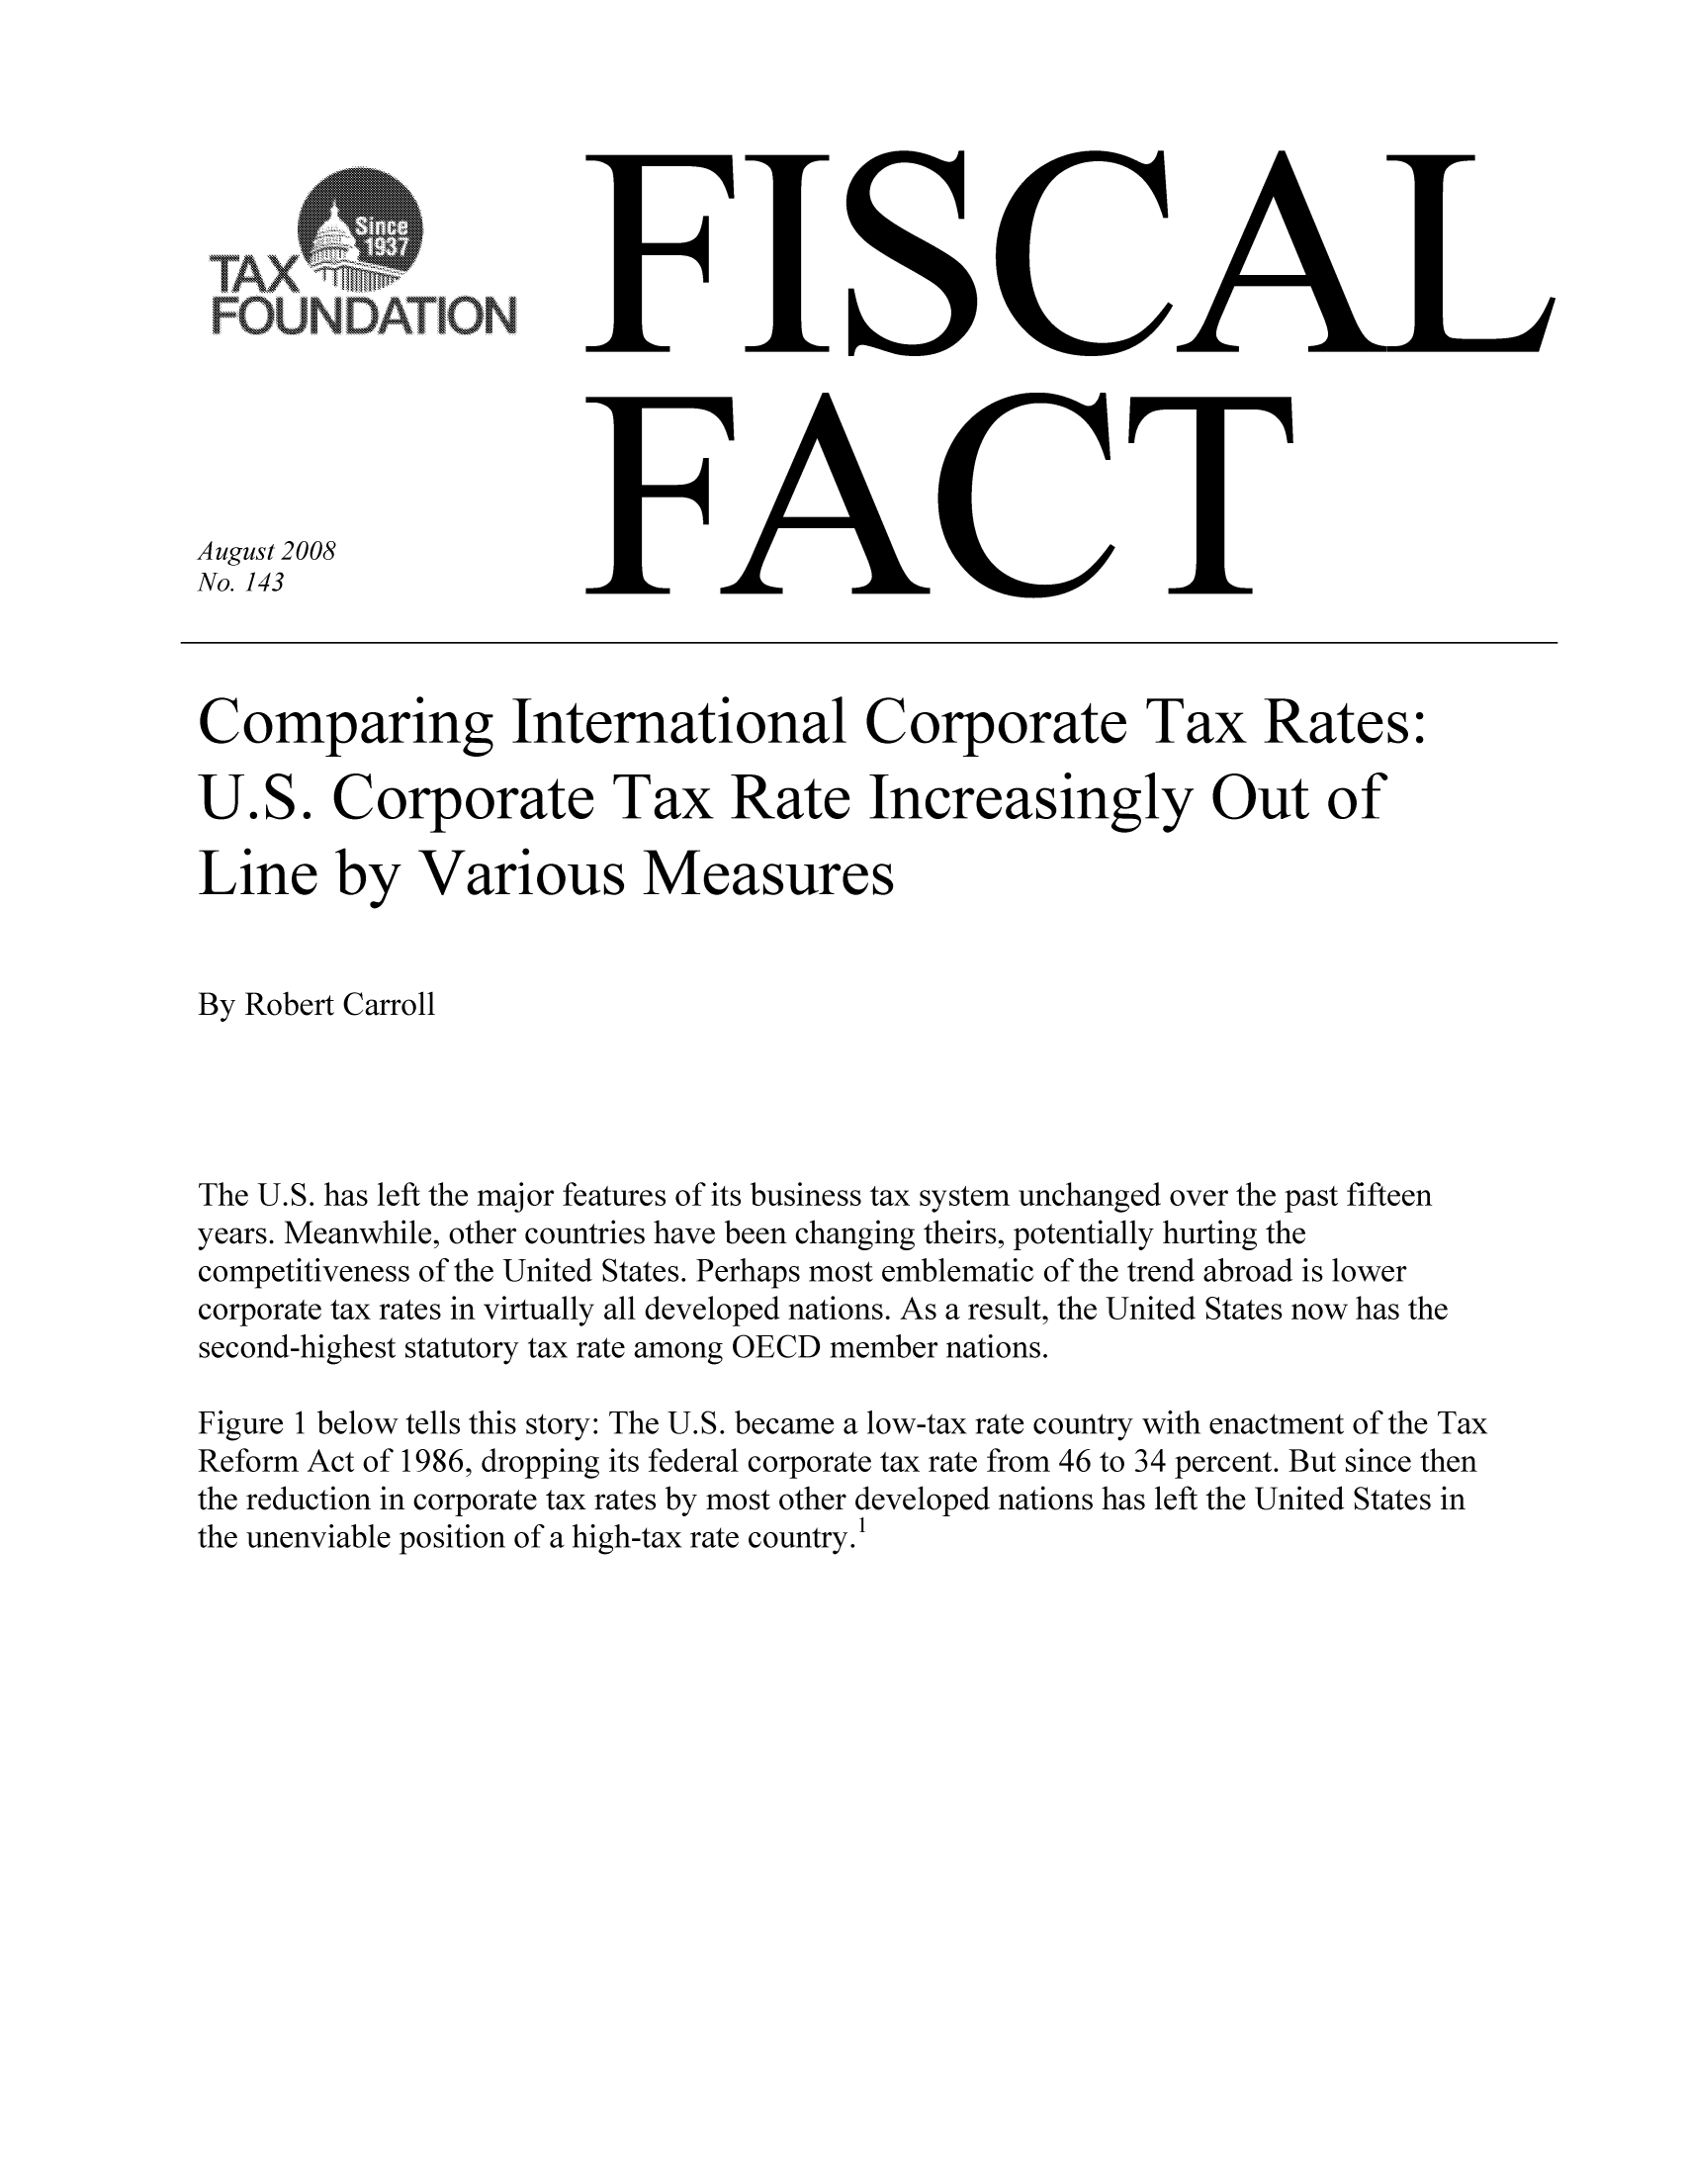 handle is hein.taxfoundation/ffbedxz0001 and id is 1 raw text is: FISCAL

FACT

August 2008
No. 143

Comparing International Corporate Tax Rates:
U.S. Corporate Tax Rate Increasingly Out of
Line by Various Measures
By Robert Carroll
The U.S. has left the major features of its business tax system unchanged over the past fifteen
years. Meanwhile, other countries have been changing theirs, potentially hurting the
competitiveness of the United States. Perhaps most emblematic of the trend abroad is lower
corporate tax rates in virtually all developed nations. As a result, the United States now has the
second-highest statutory tax rate among OECD member nations.
Figure 1 below tells this story: The U.S. became a low-tax rate country with enactment of the Tax
Reform Act of 1986, dropping its federal corporate tax rate from 46 to 34 percent. But since then
the reduction in corporate tax rates by most other developed nations has left the United States in
the unenviable position of a high-tax rate country.1

)ATION


